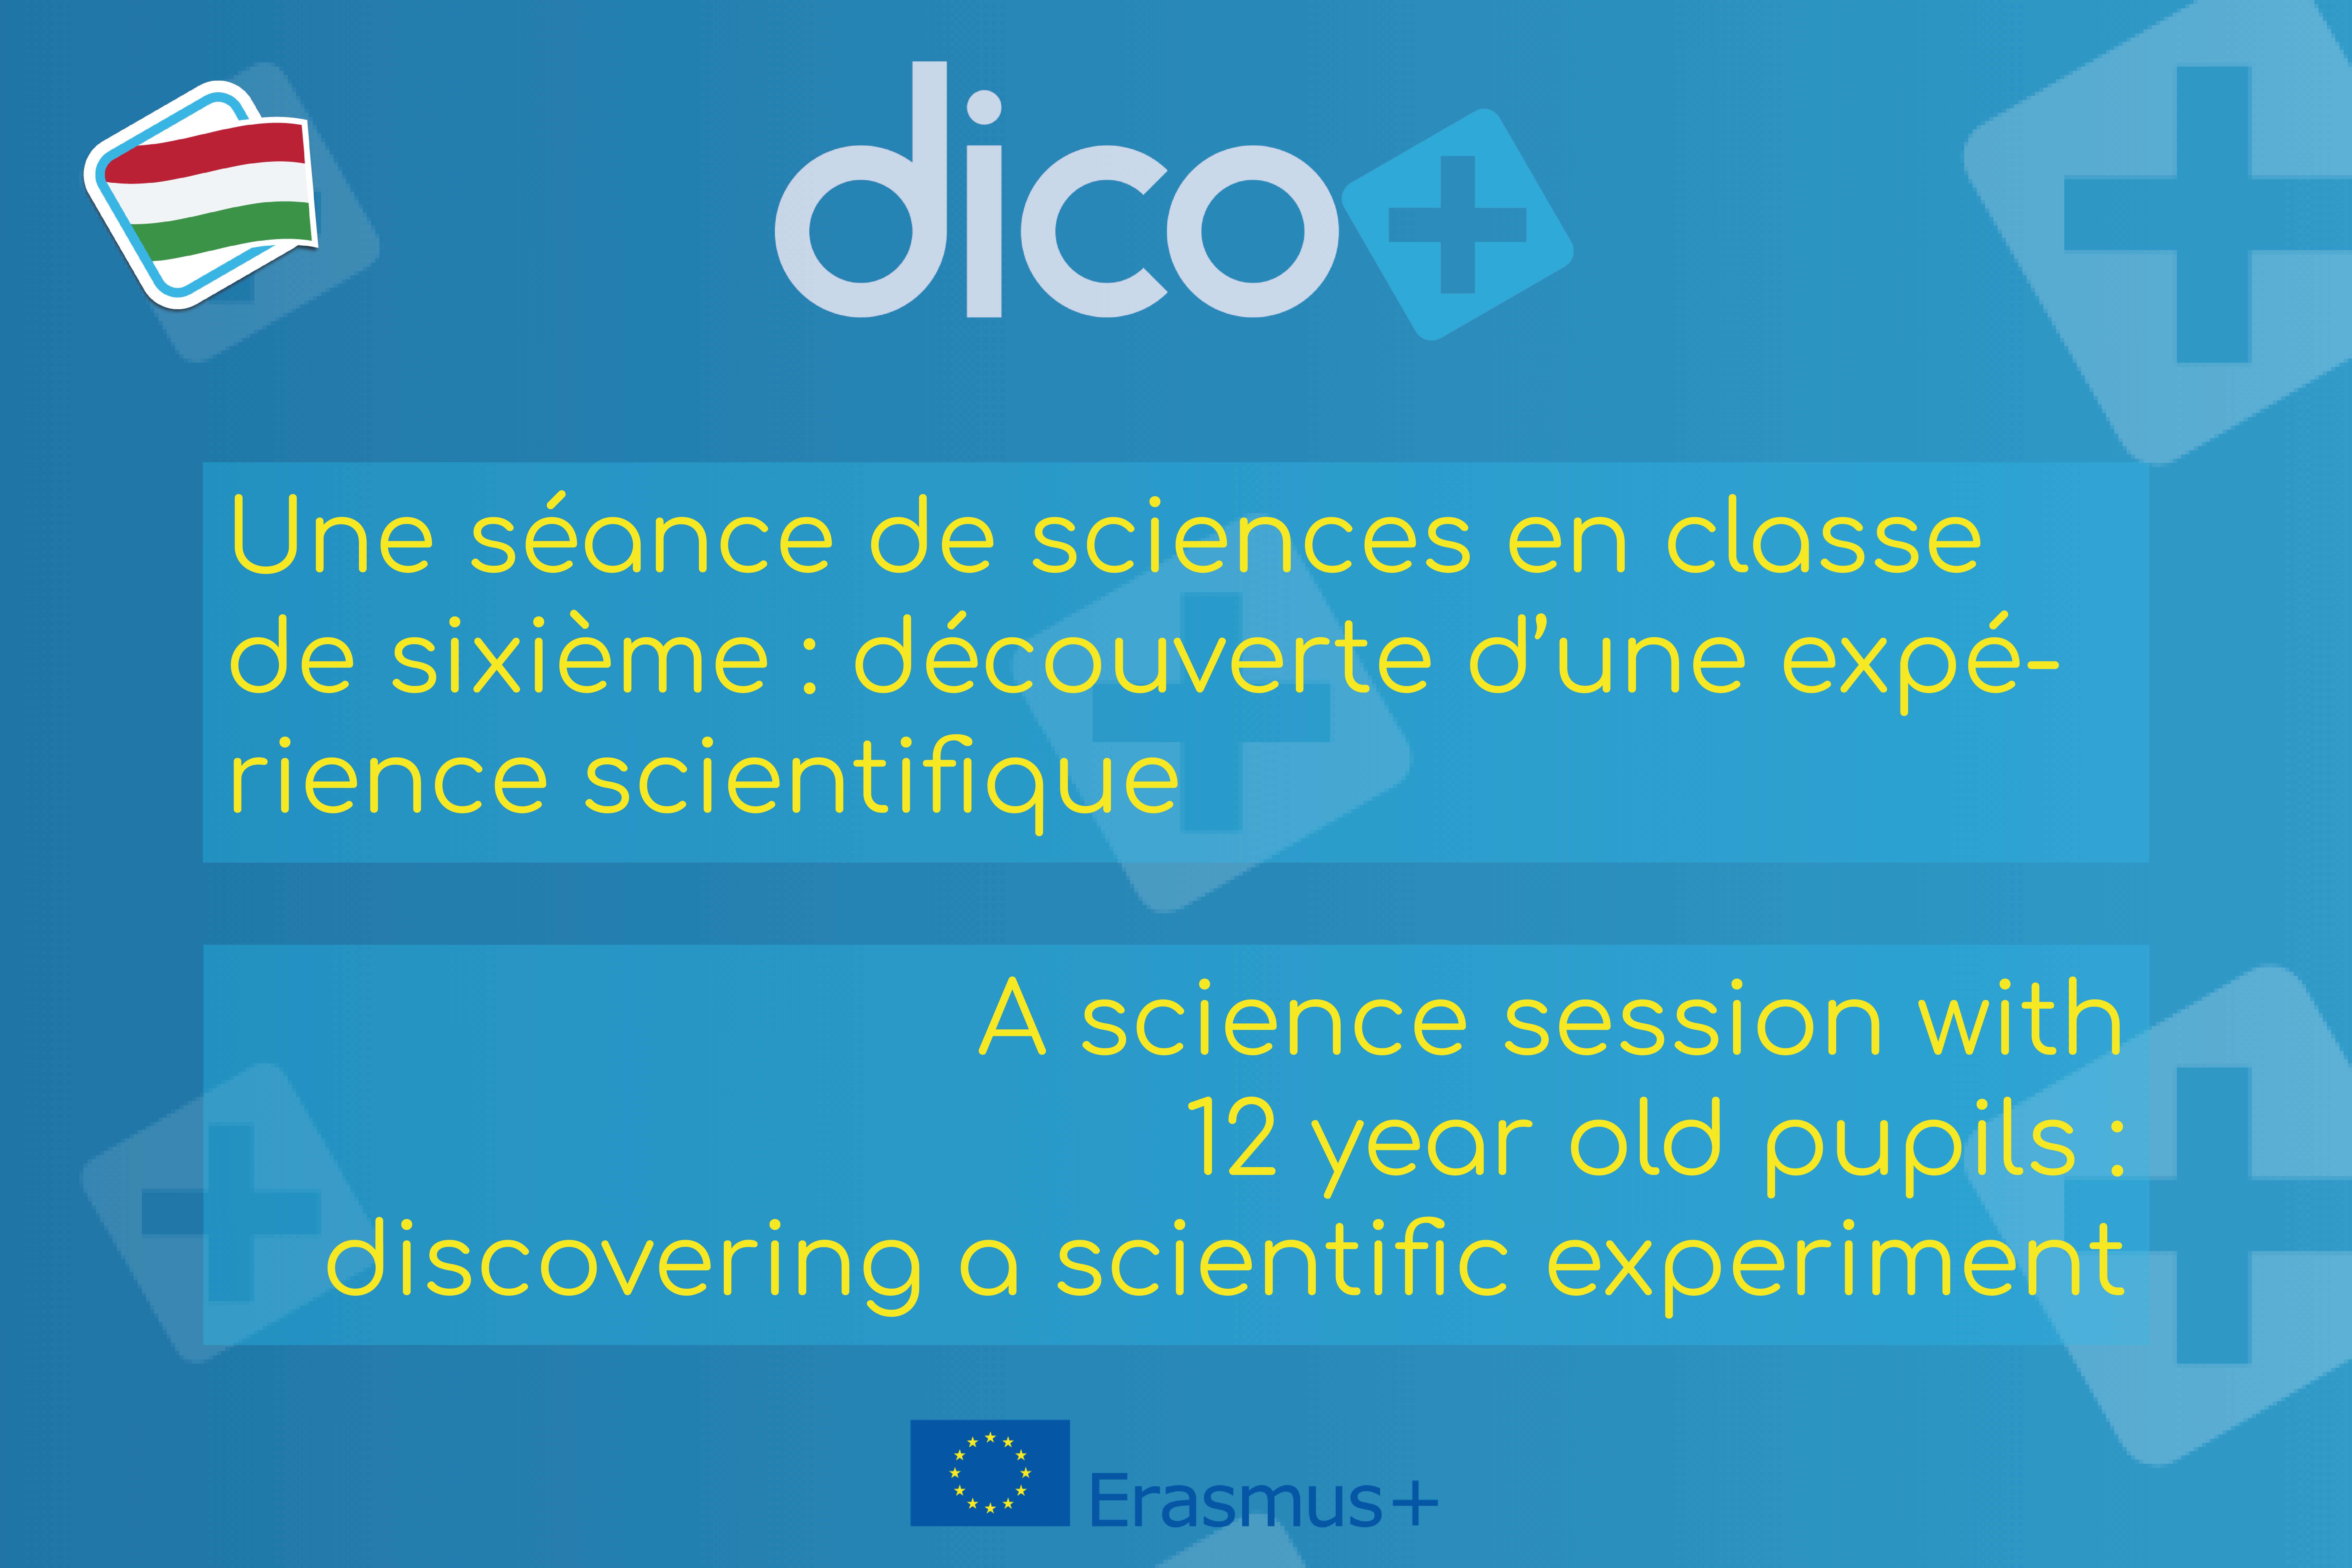 A science session with 12 years old pupils : discovery of a scientific experiment